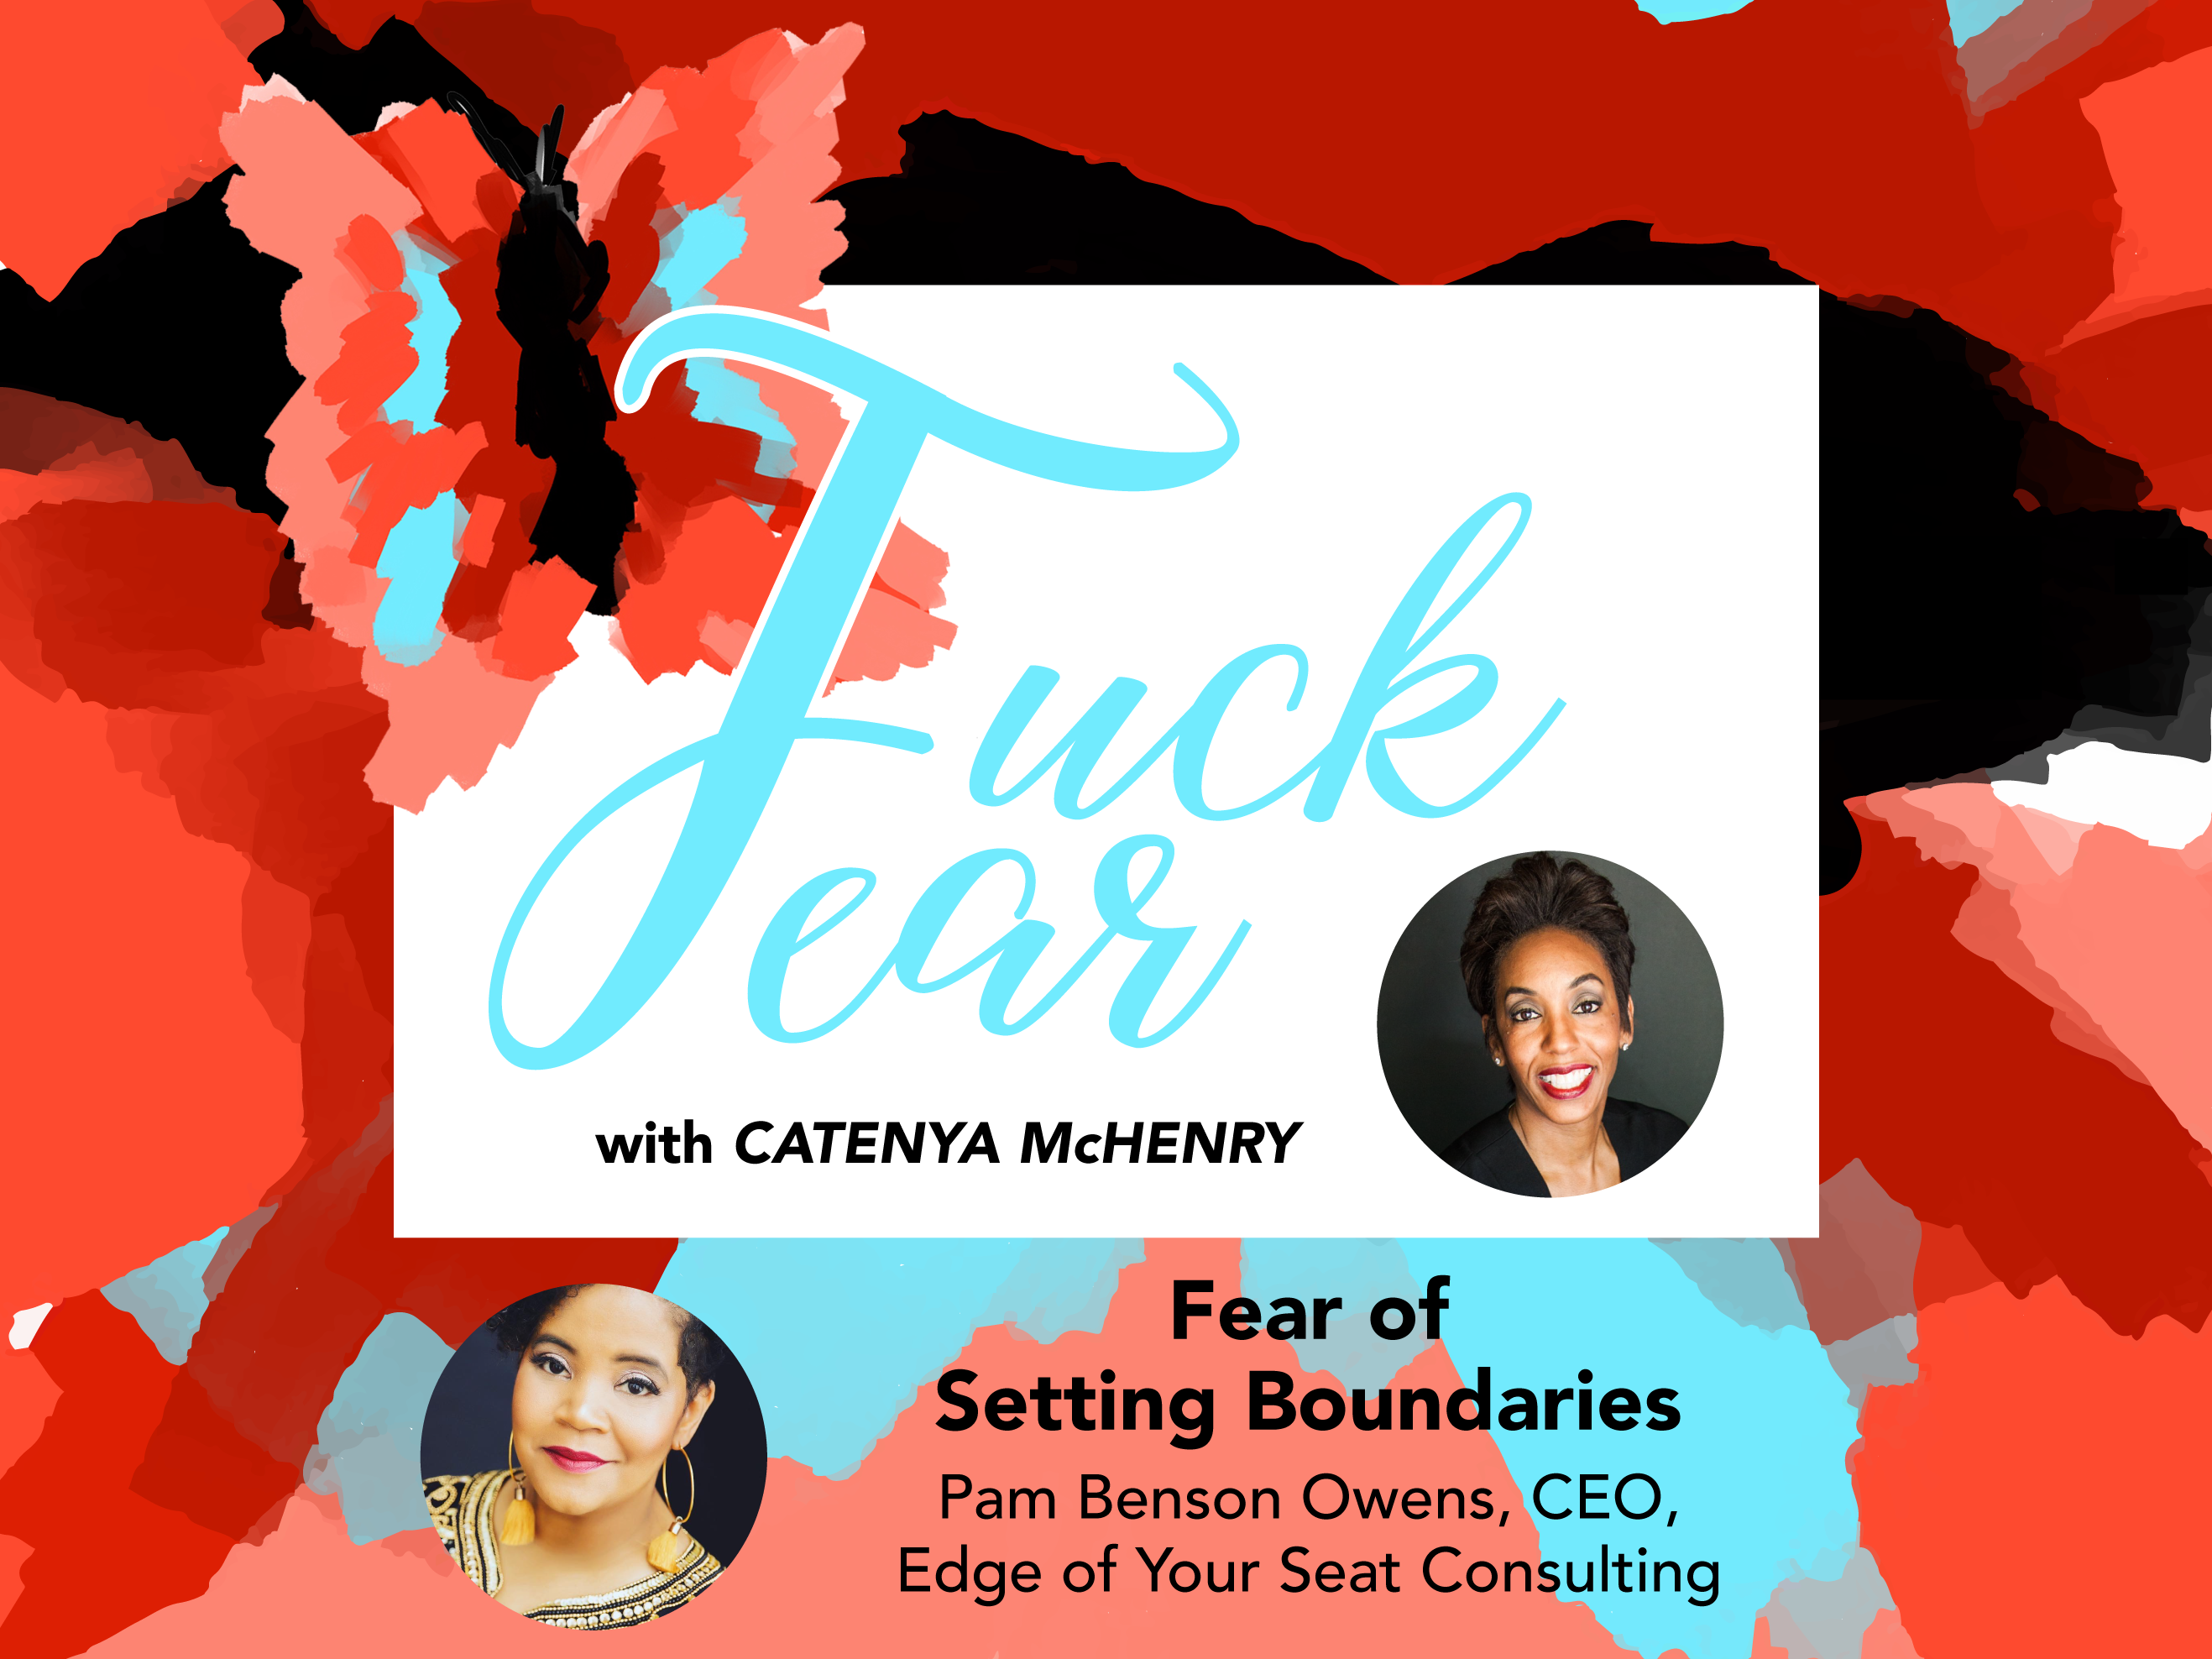 Fear of setting boundaries with Catenya McHenry on the Fuck Fear podcast. CEO and Entrepreneur Pam Benson Owens talks about the fear of setting boundaries in life, career and in her relationships.